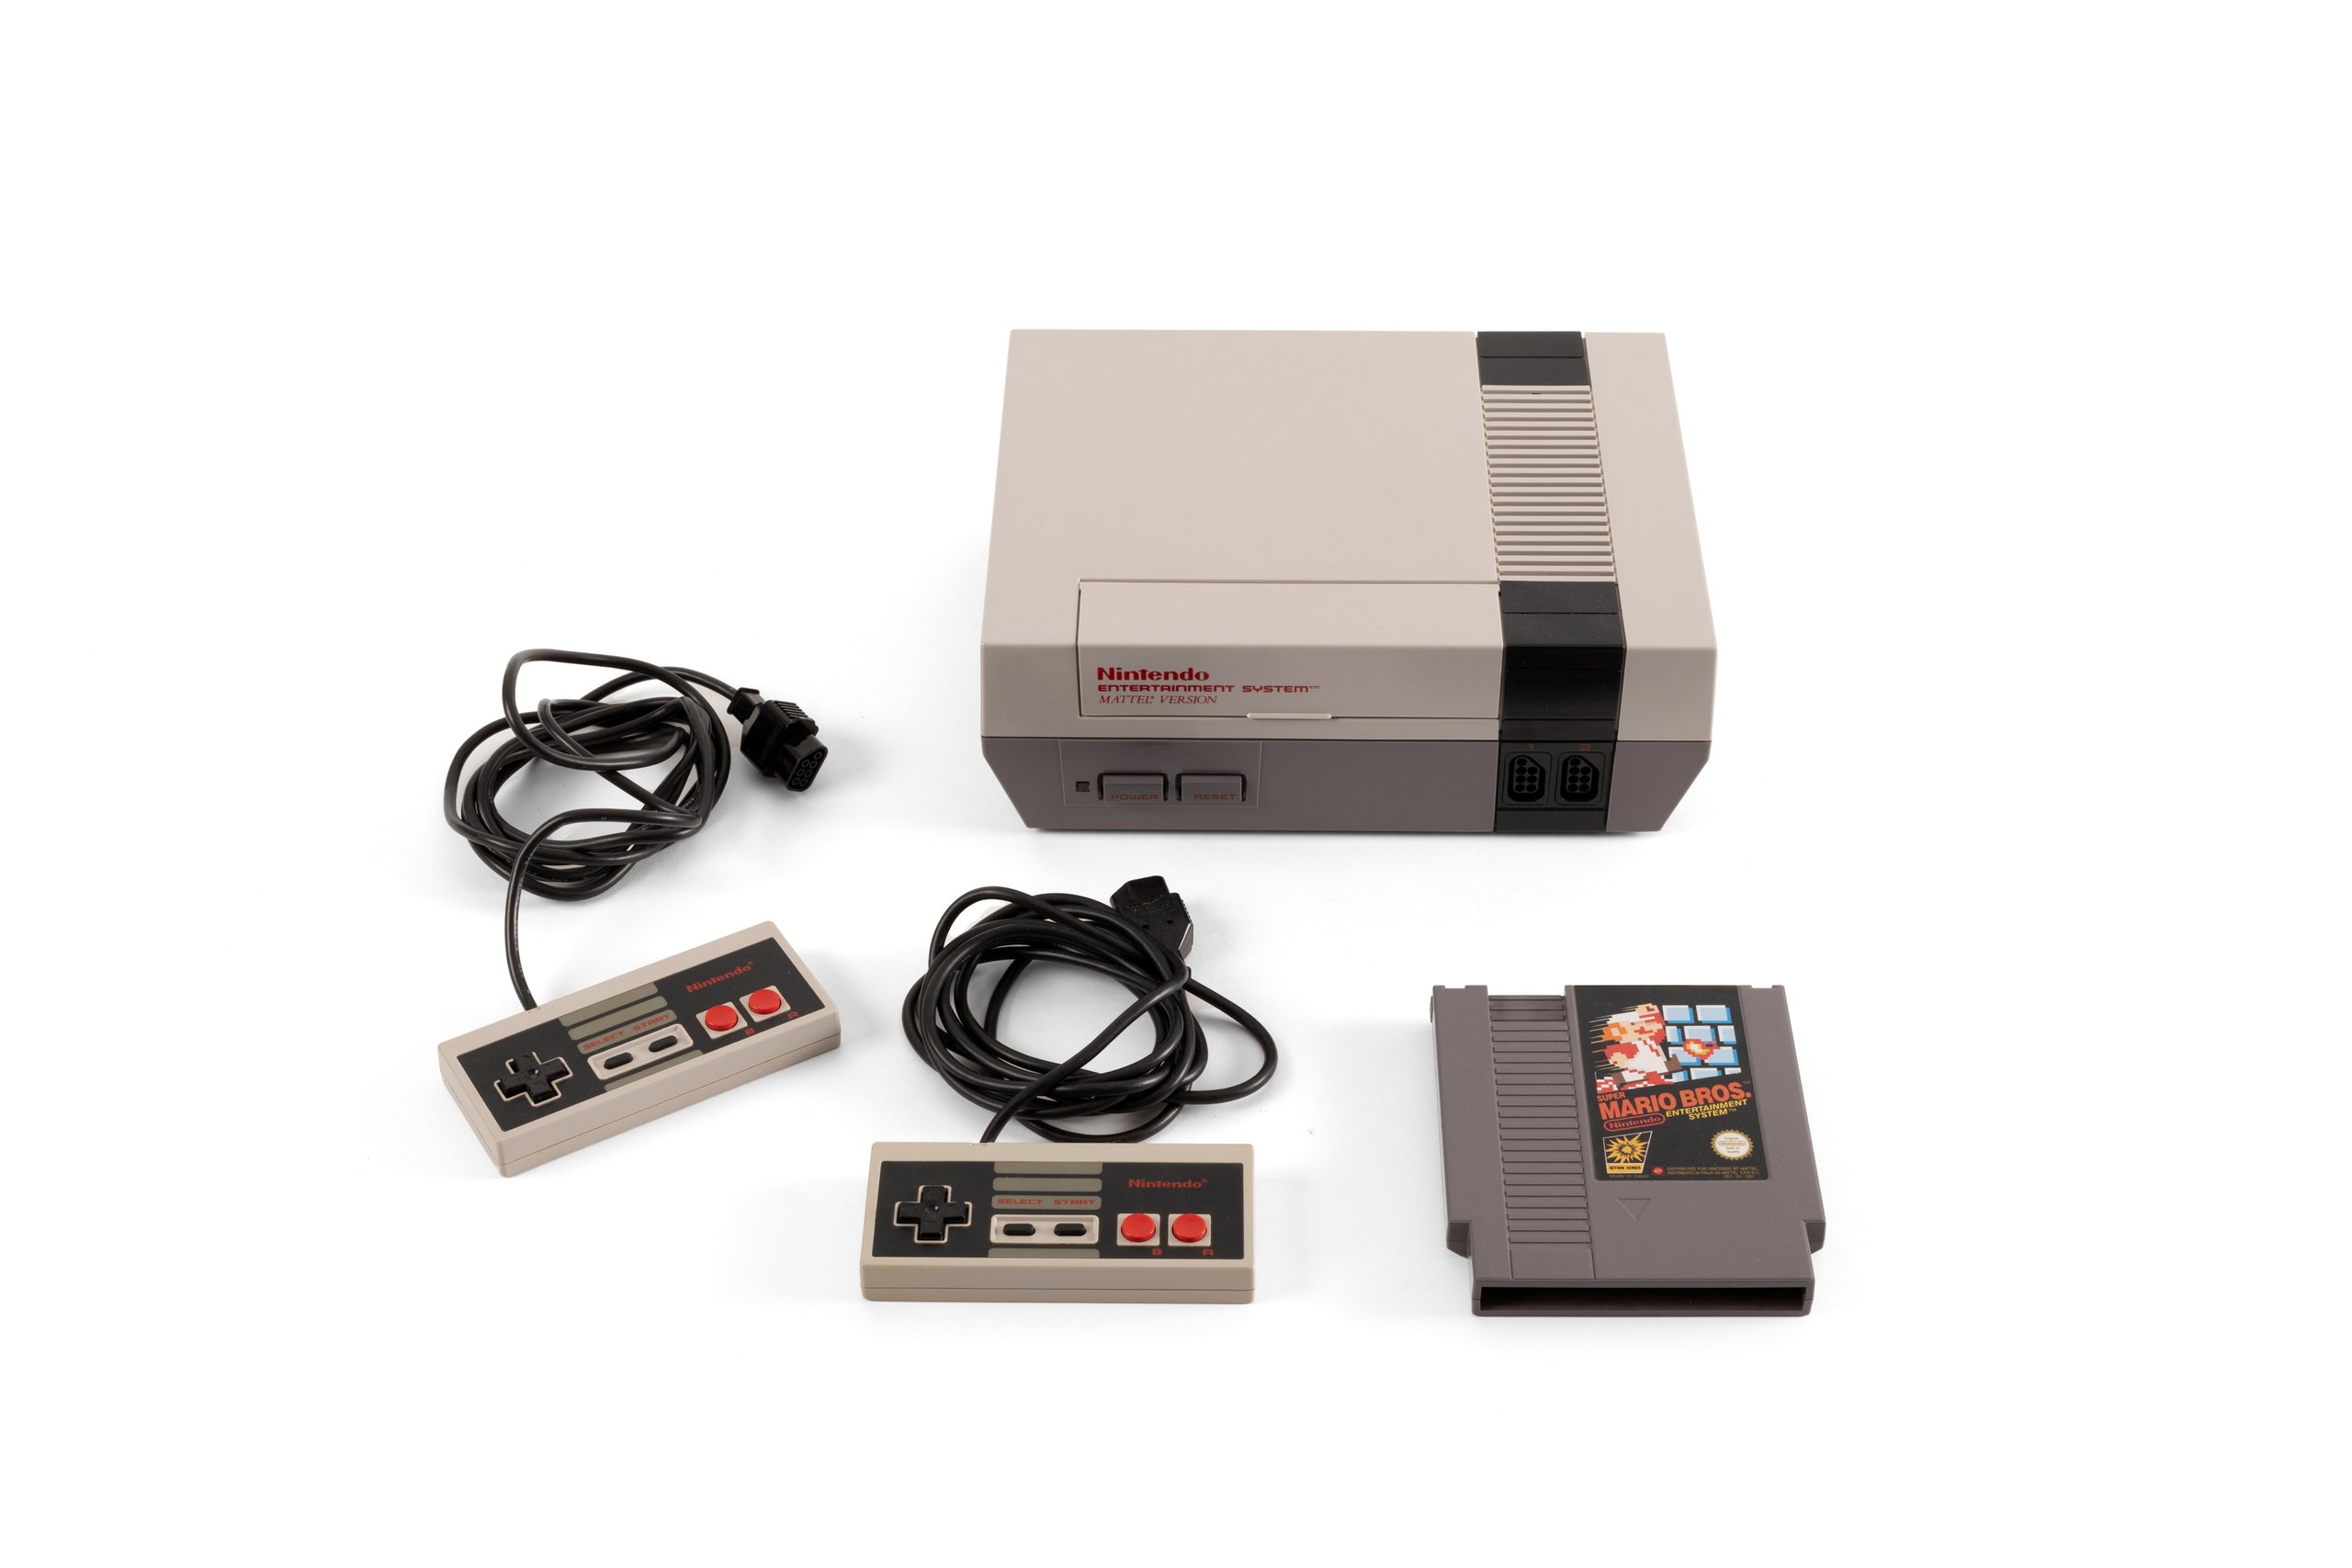 'NES' video game console with accessories and packaging by Nintendo Co Ltd